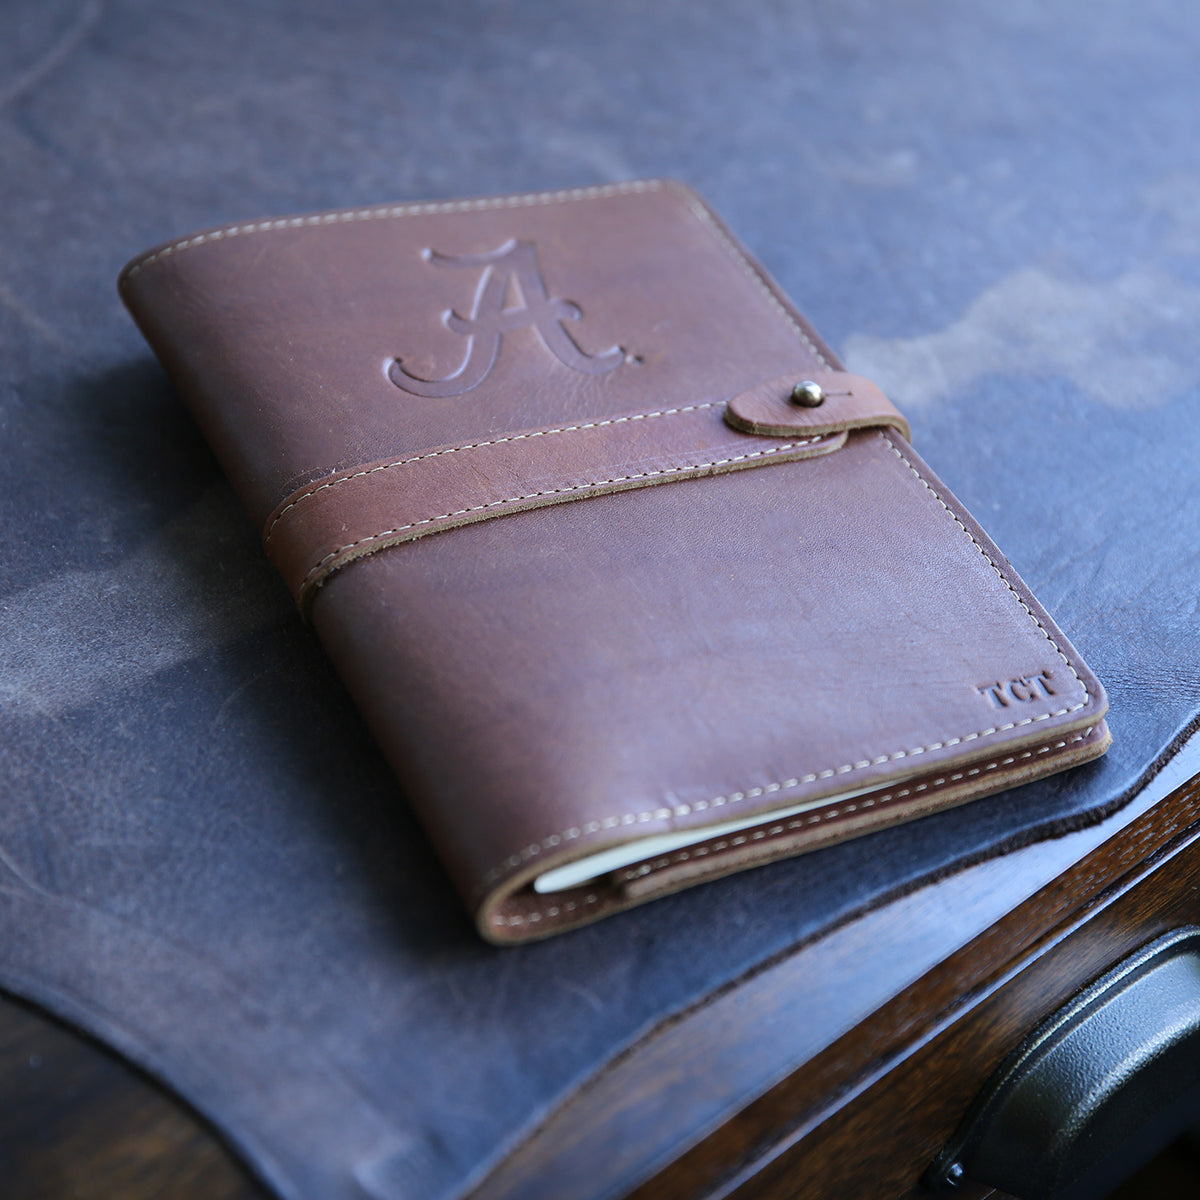 The Officially Licensed Alabama Inventor Personalized Fine Leather Journal